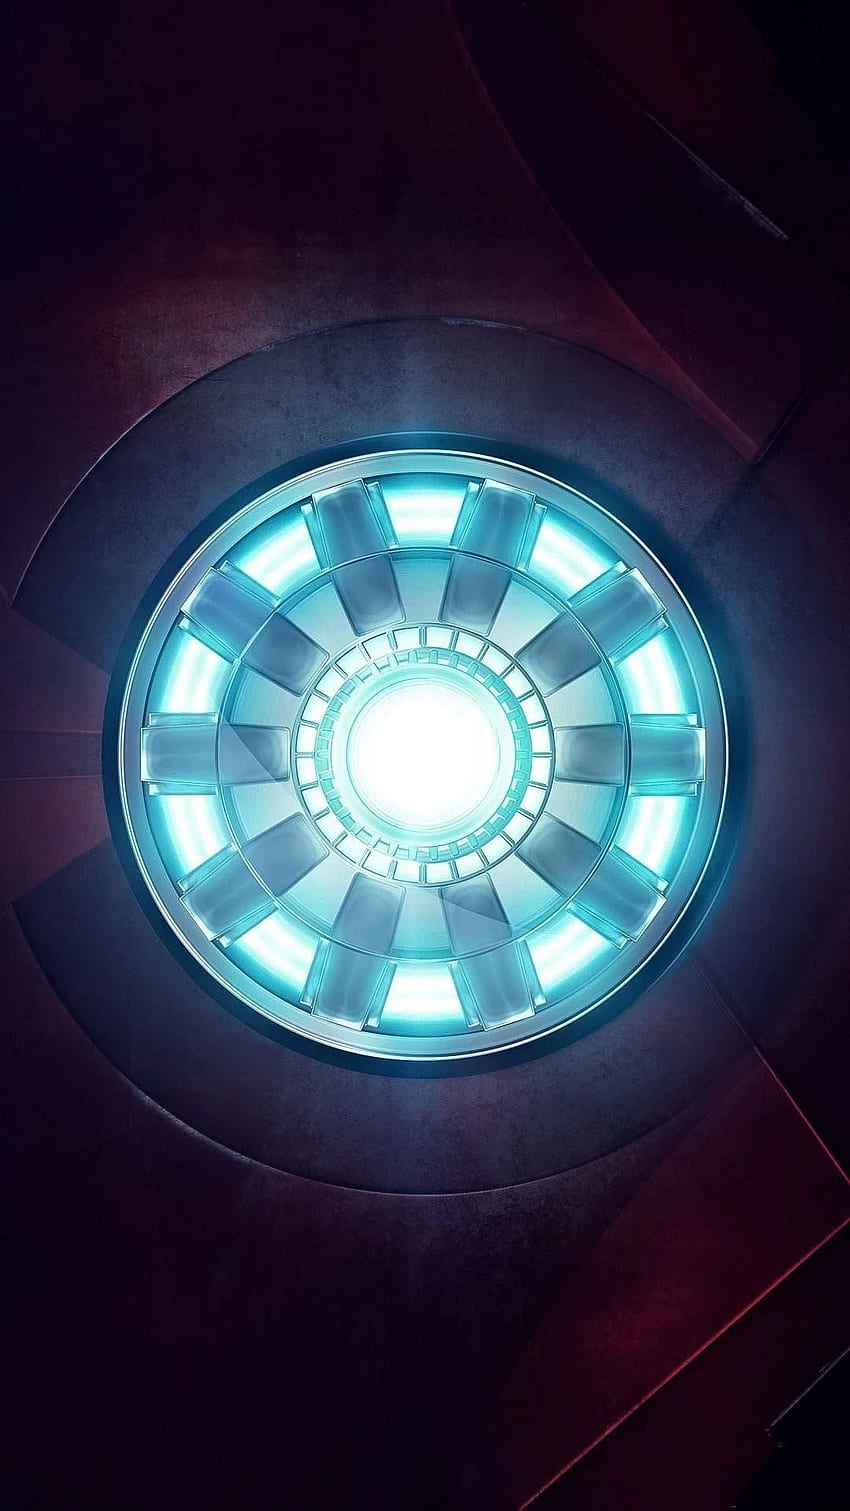 Iron Man Arc Reactor - Visit now to grab yourself a super HD phone wallpaper